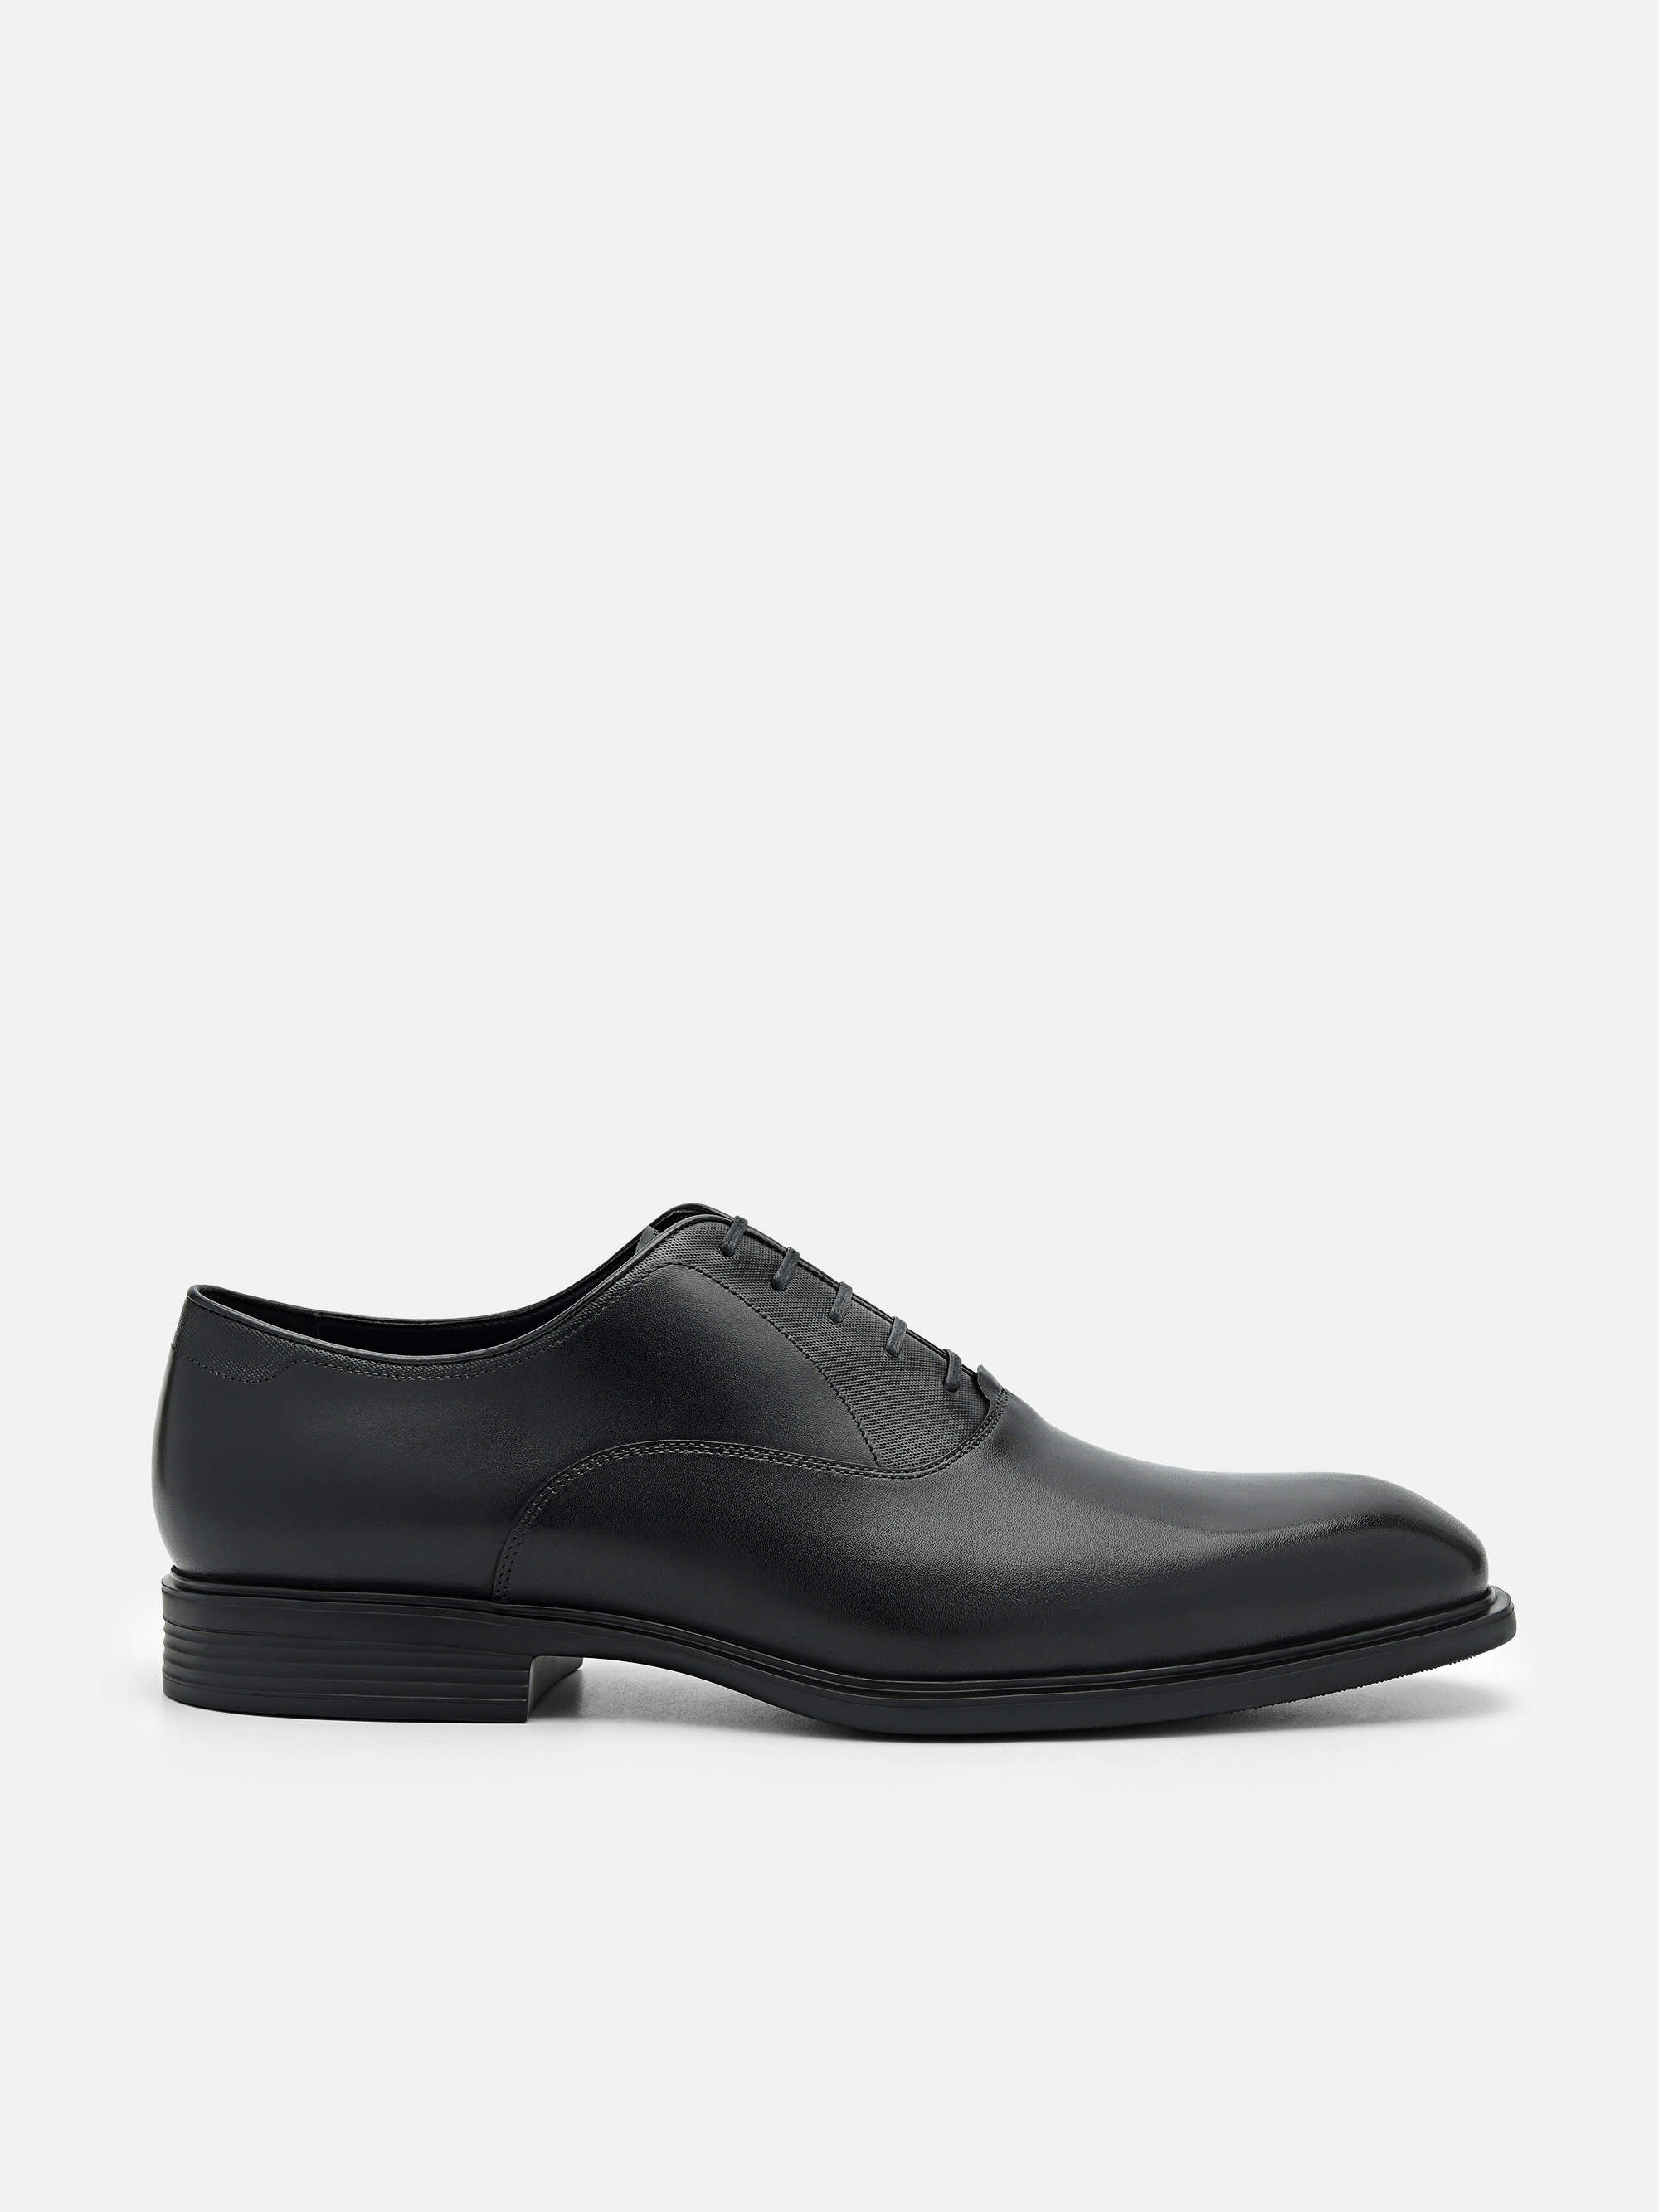 Black Leather Oxford Shoes - PEDRO SG